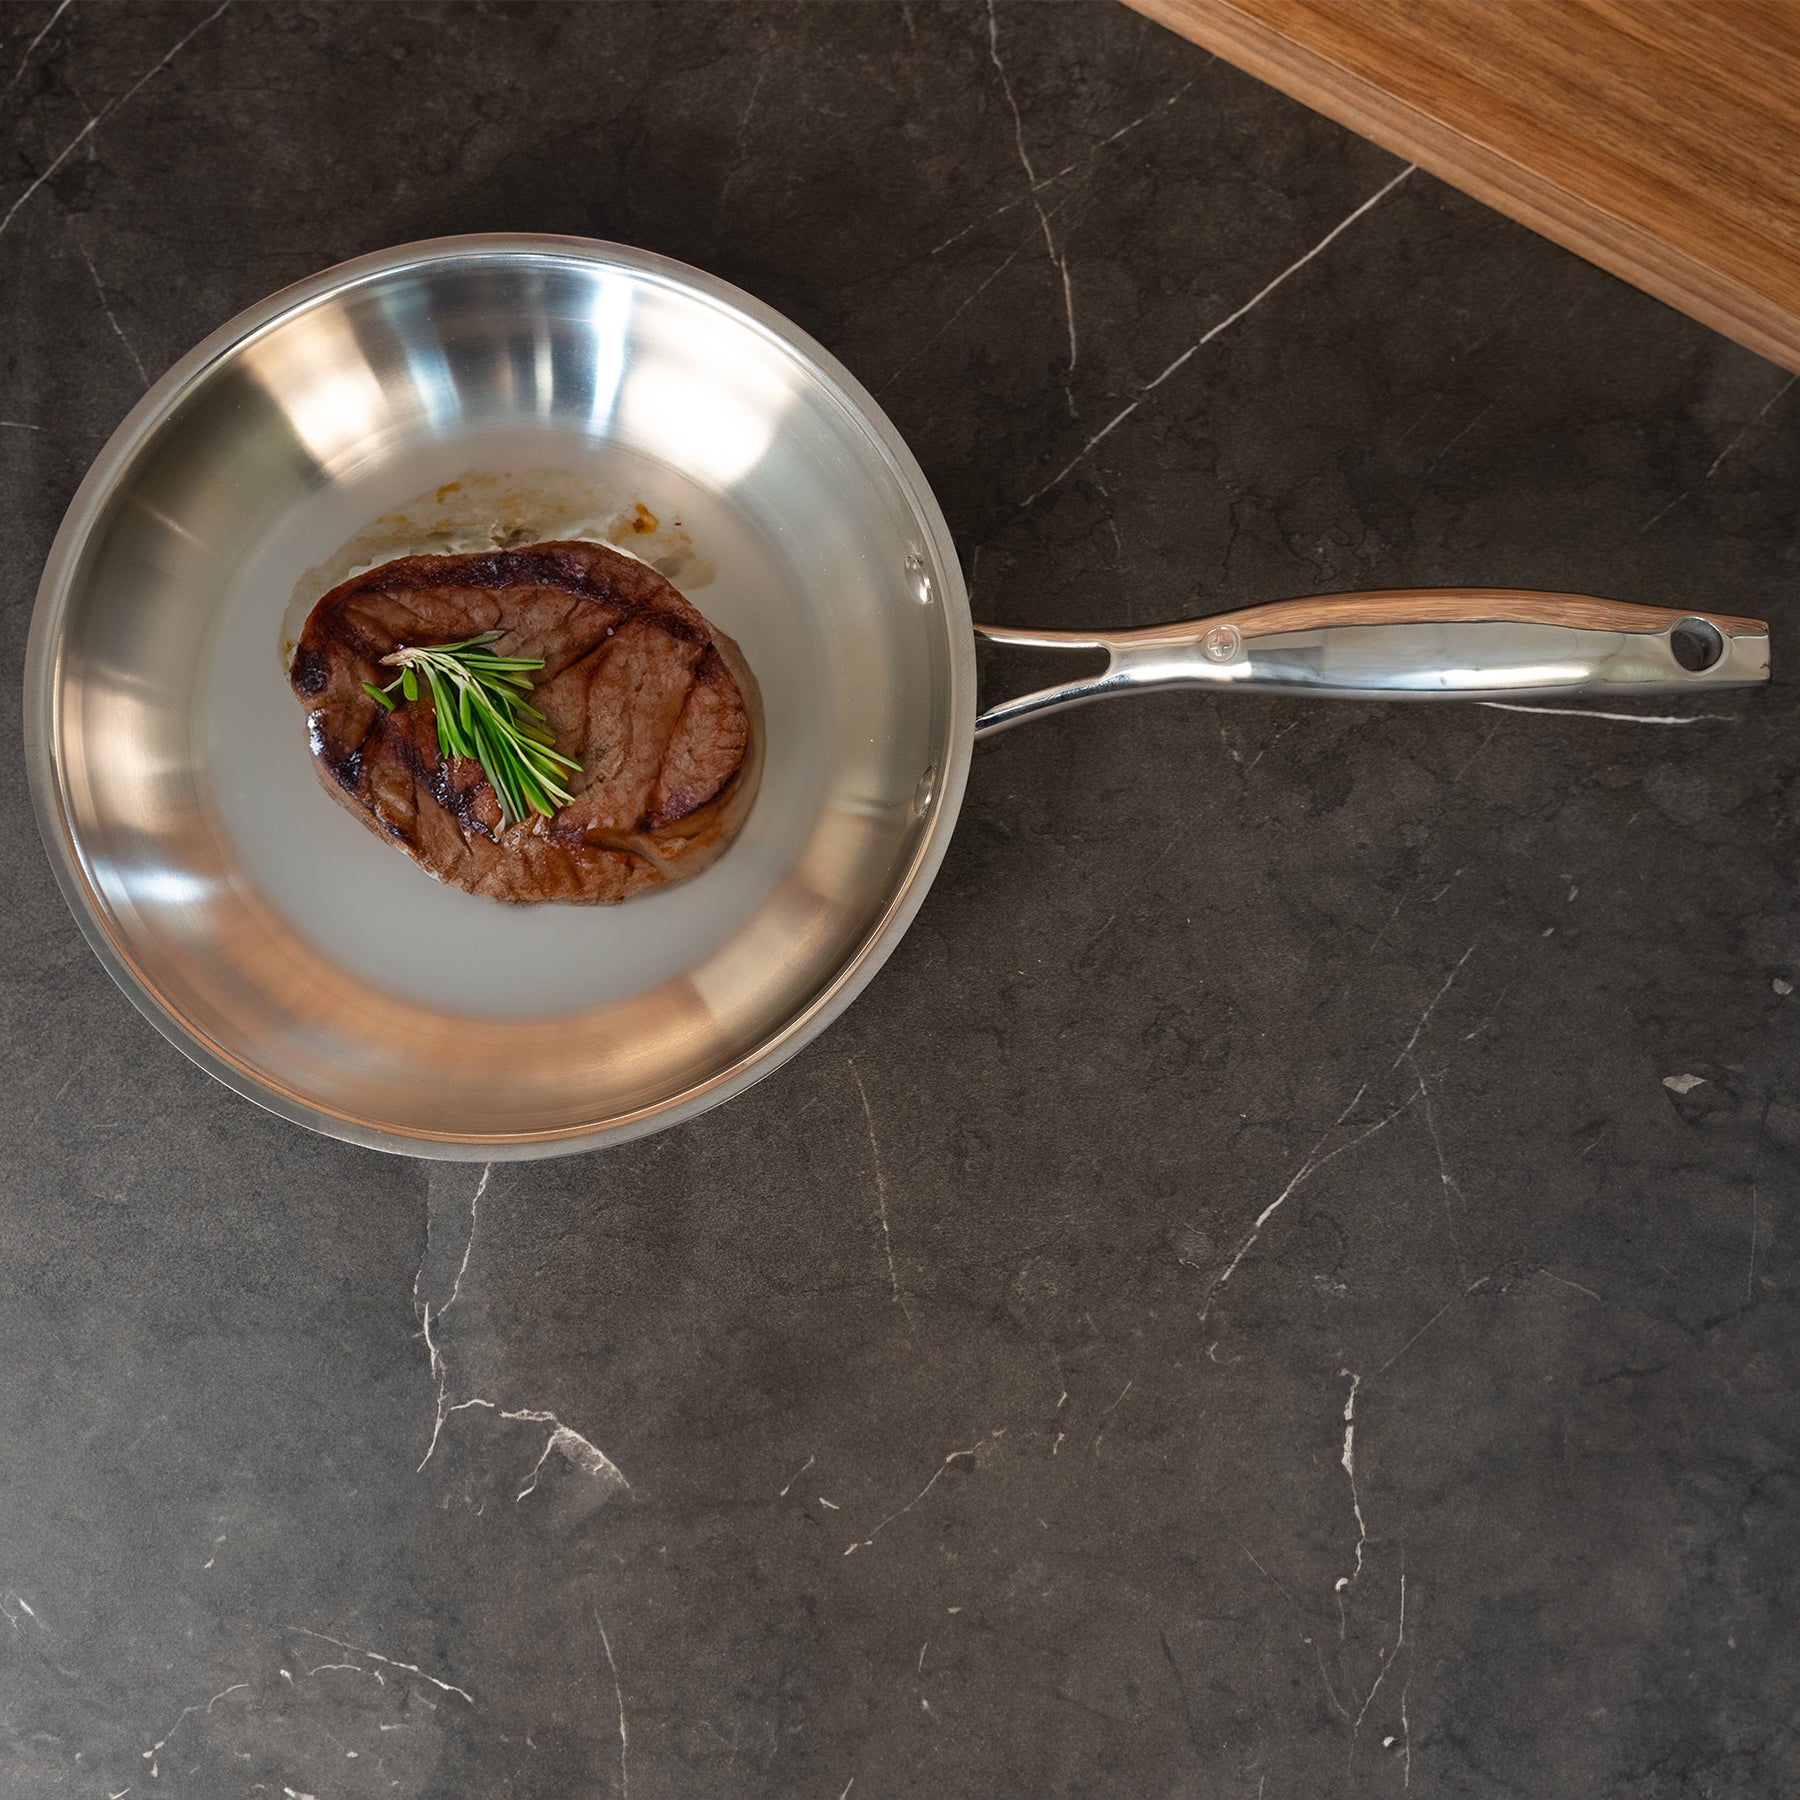 Premium Steel 8" Fry Pan - Induction in use with meat on surface on kitchen counter